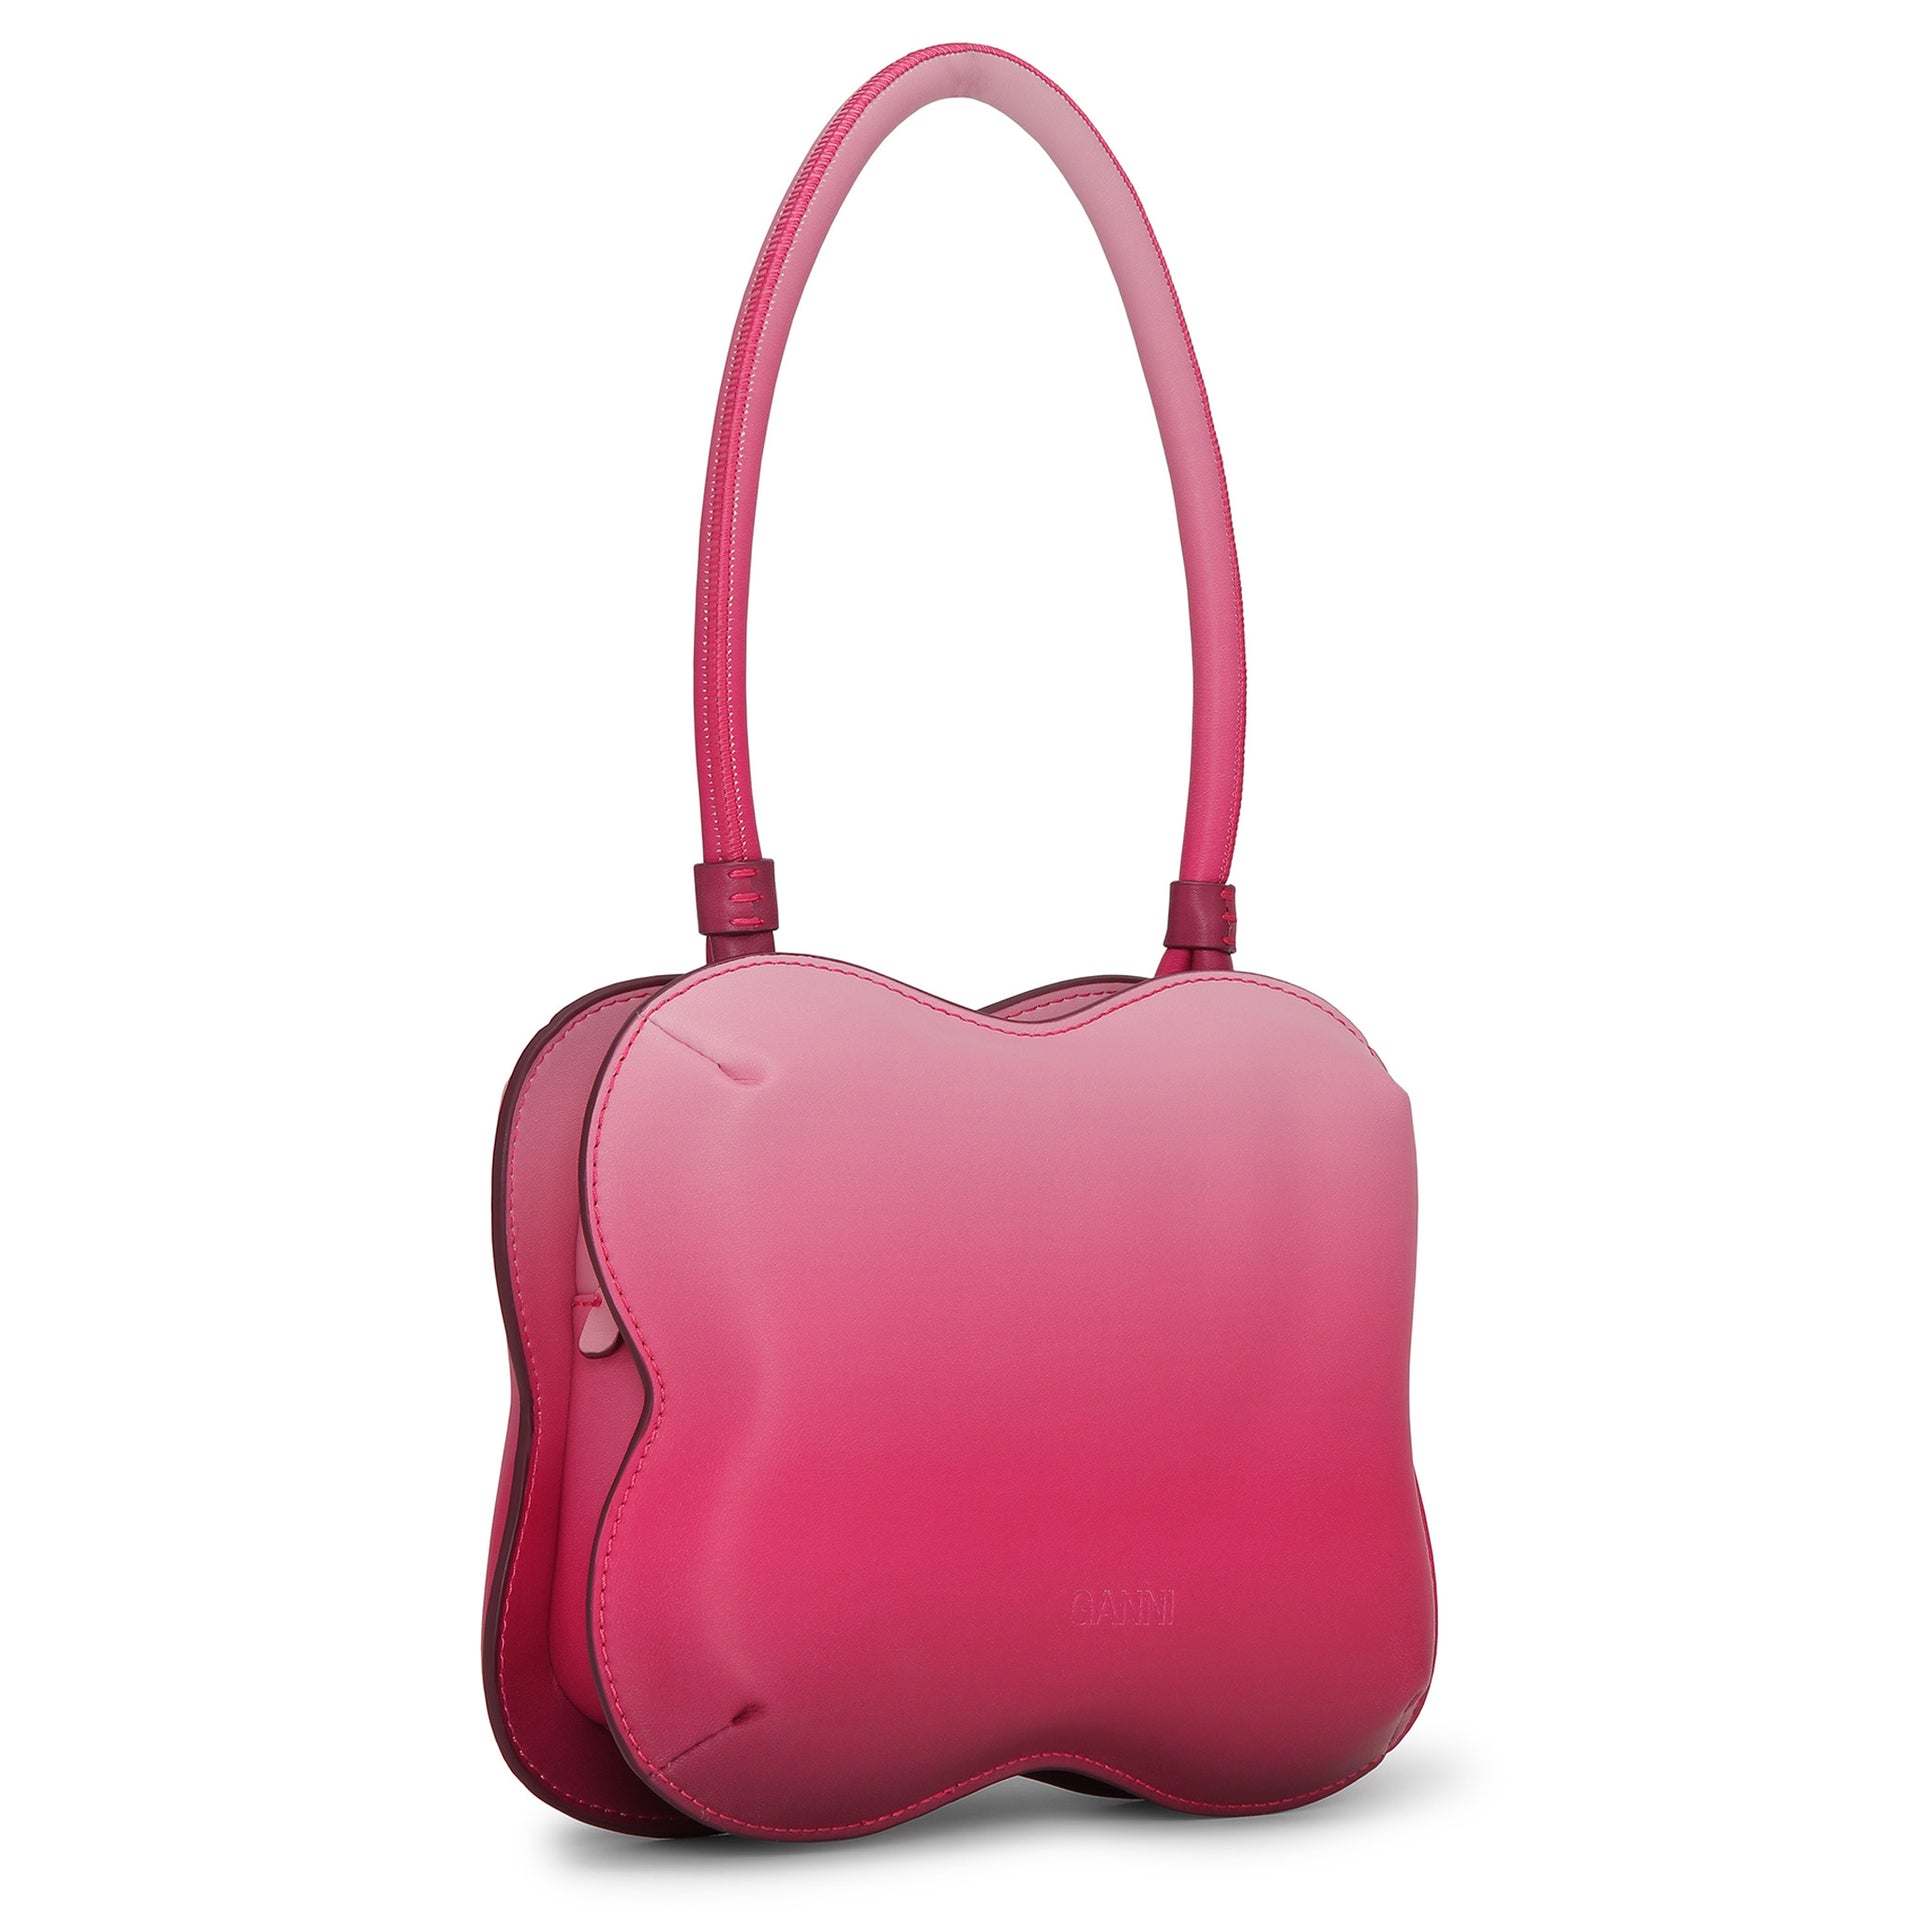 BUTTERFLY TOP HANDLE GRADIENT / 514:HOT PINK